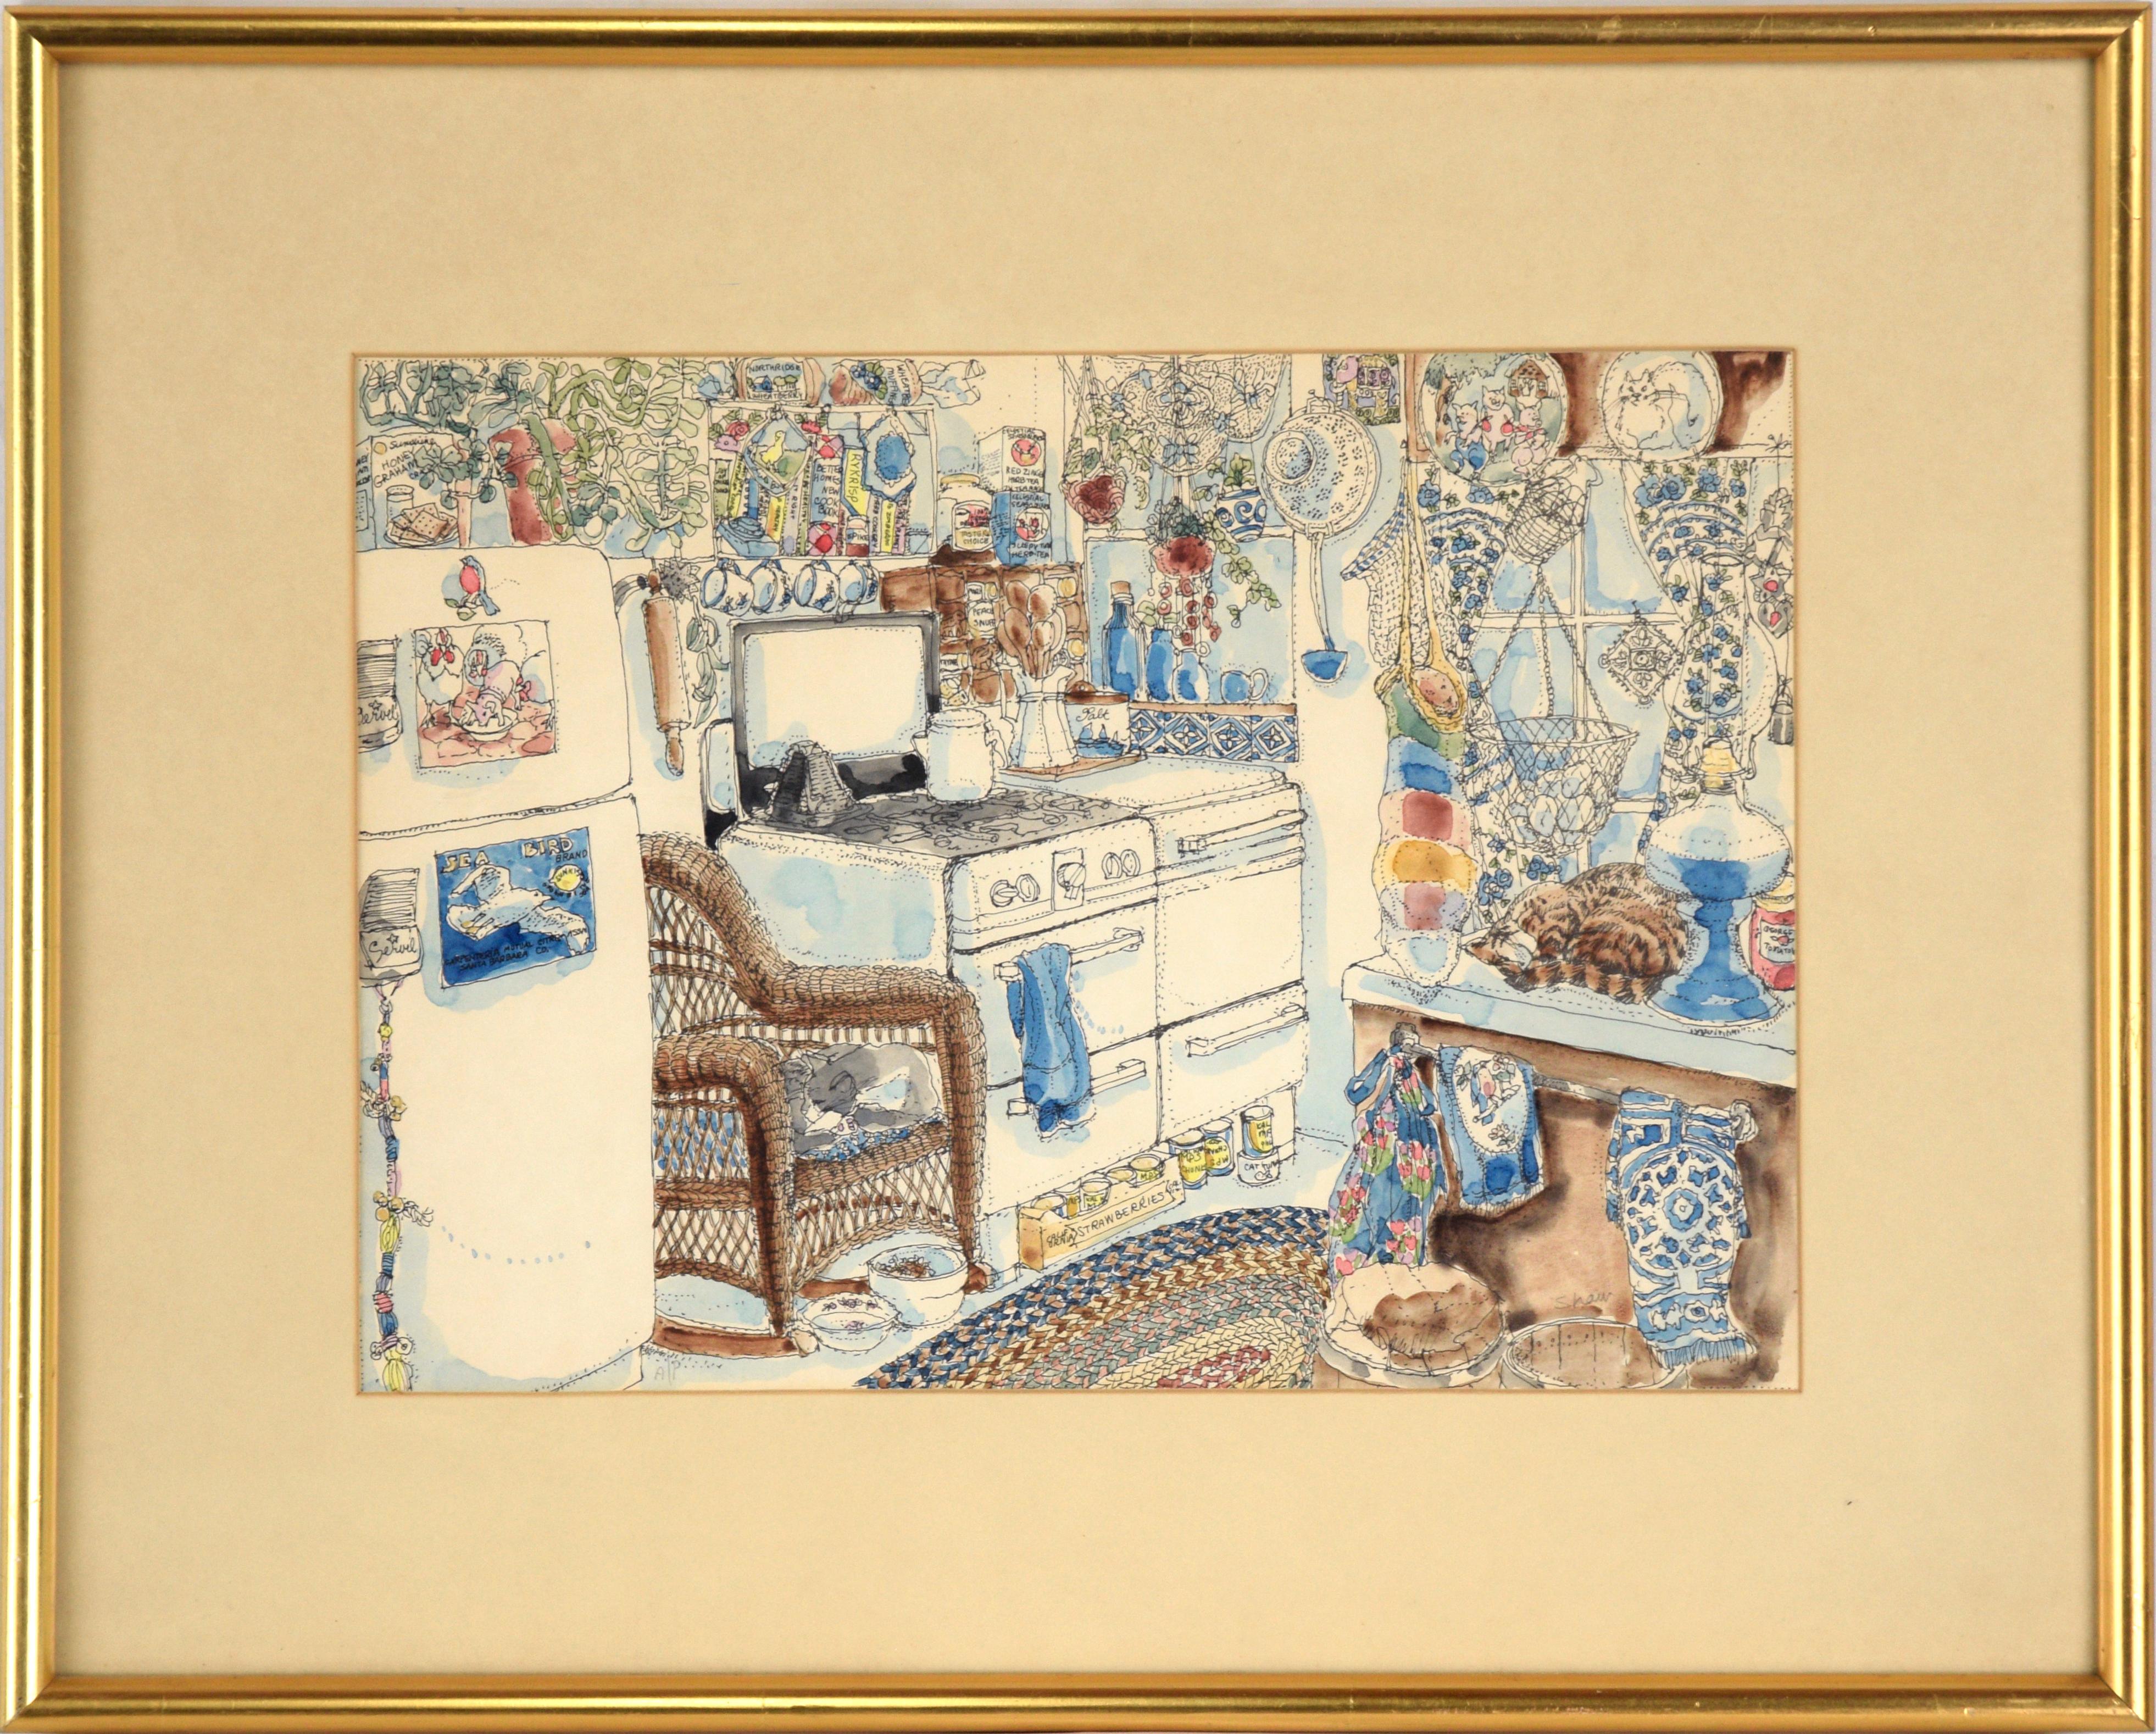 Alice Shaw Animal Art - Cozy Kitchen with Cats